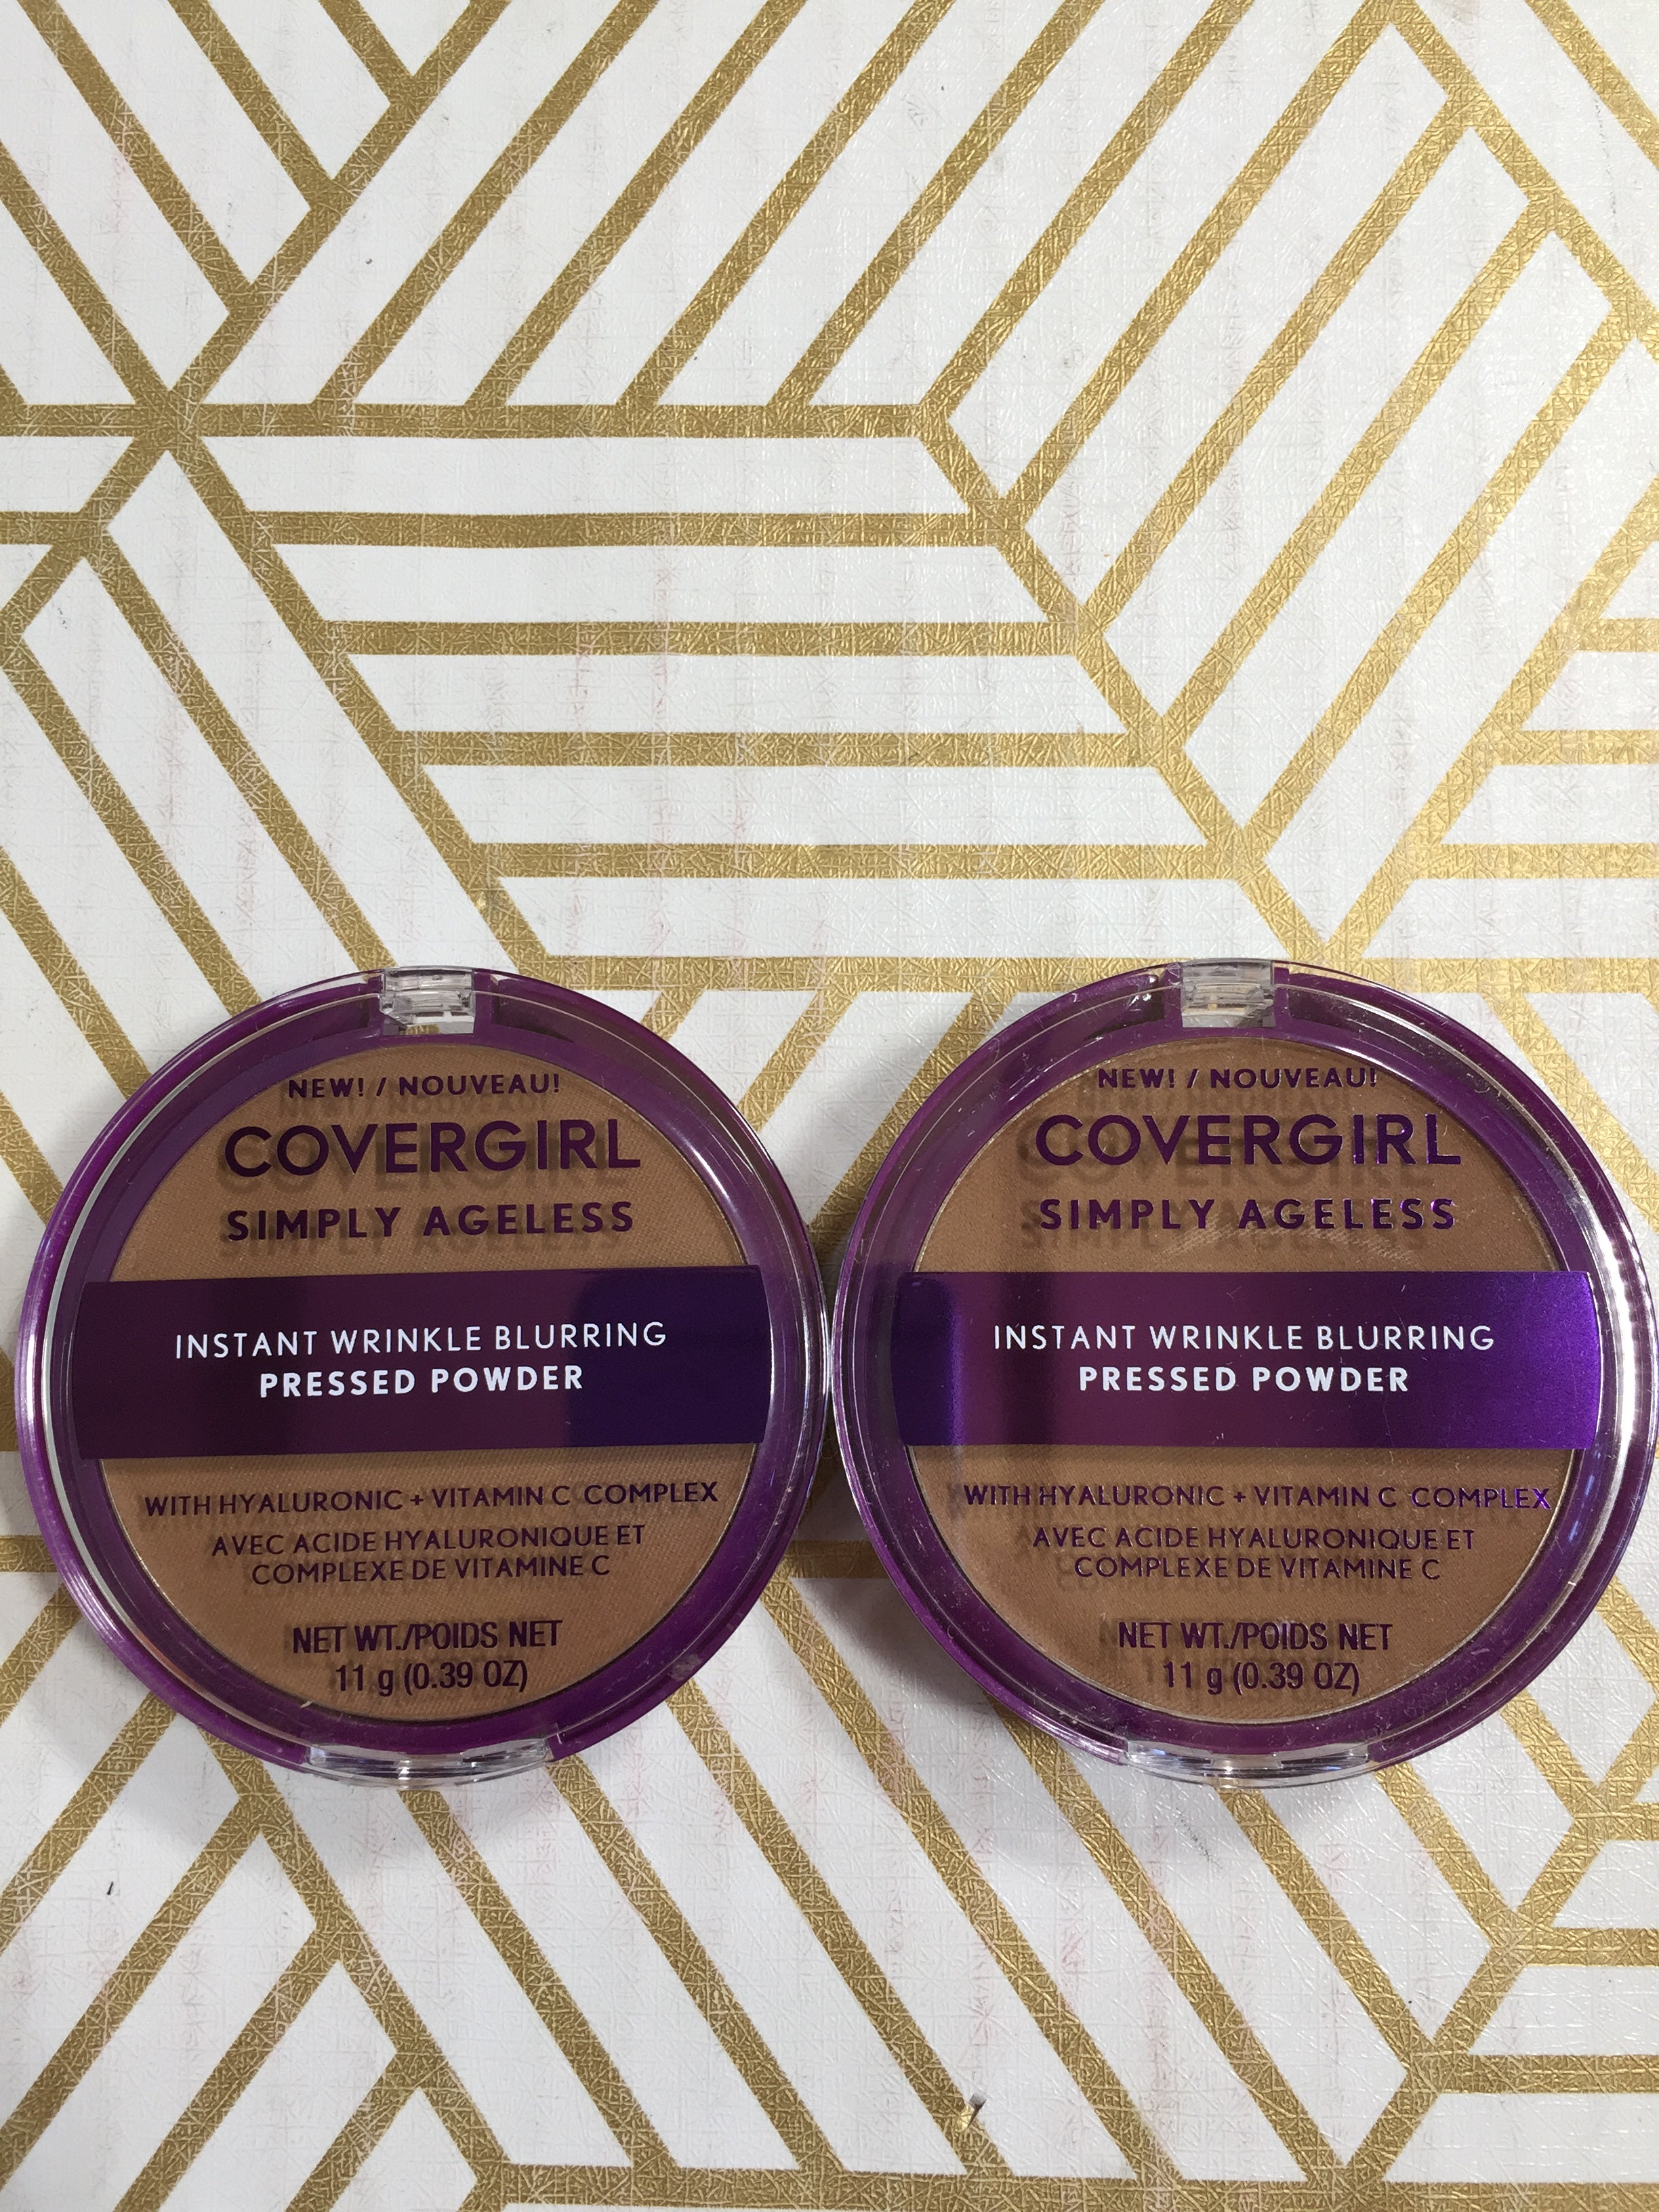 2 - Covergirl Simply Ageless Wrinkle Blurring Pressed Powder Soft Sable #275 (7916665307374)